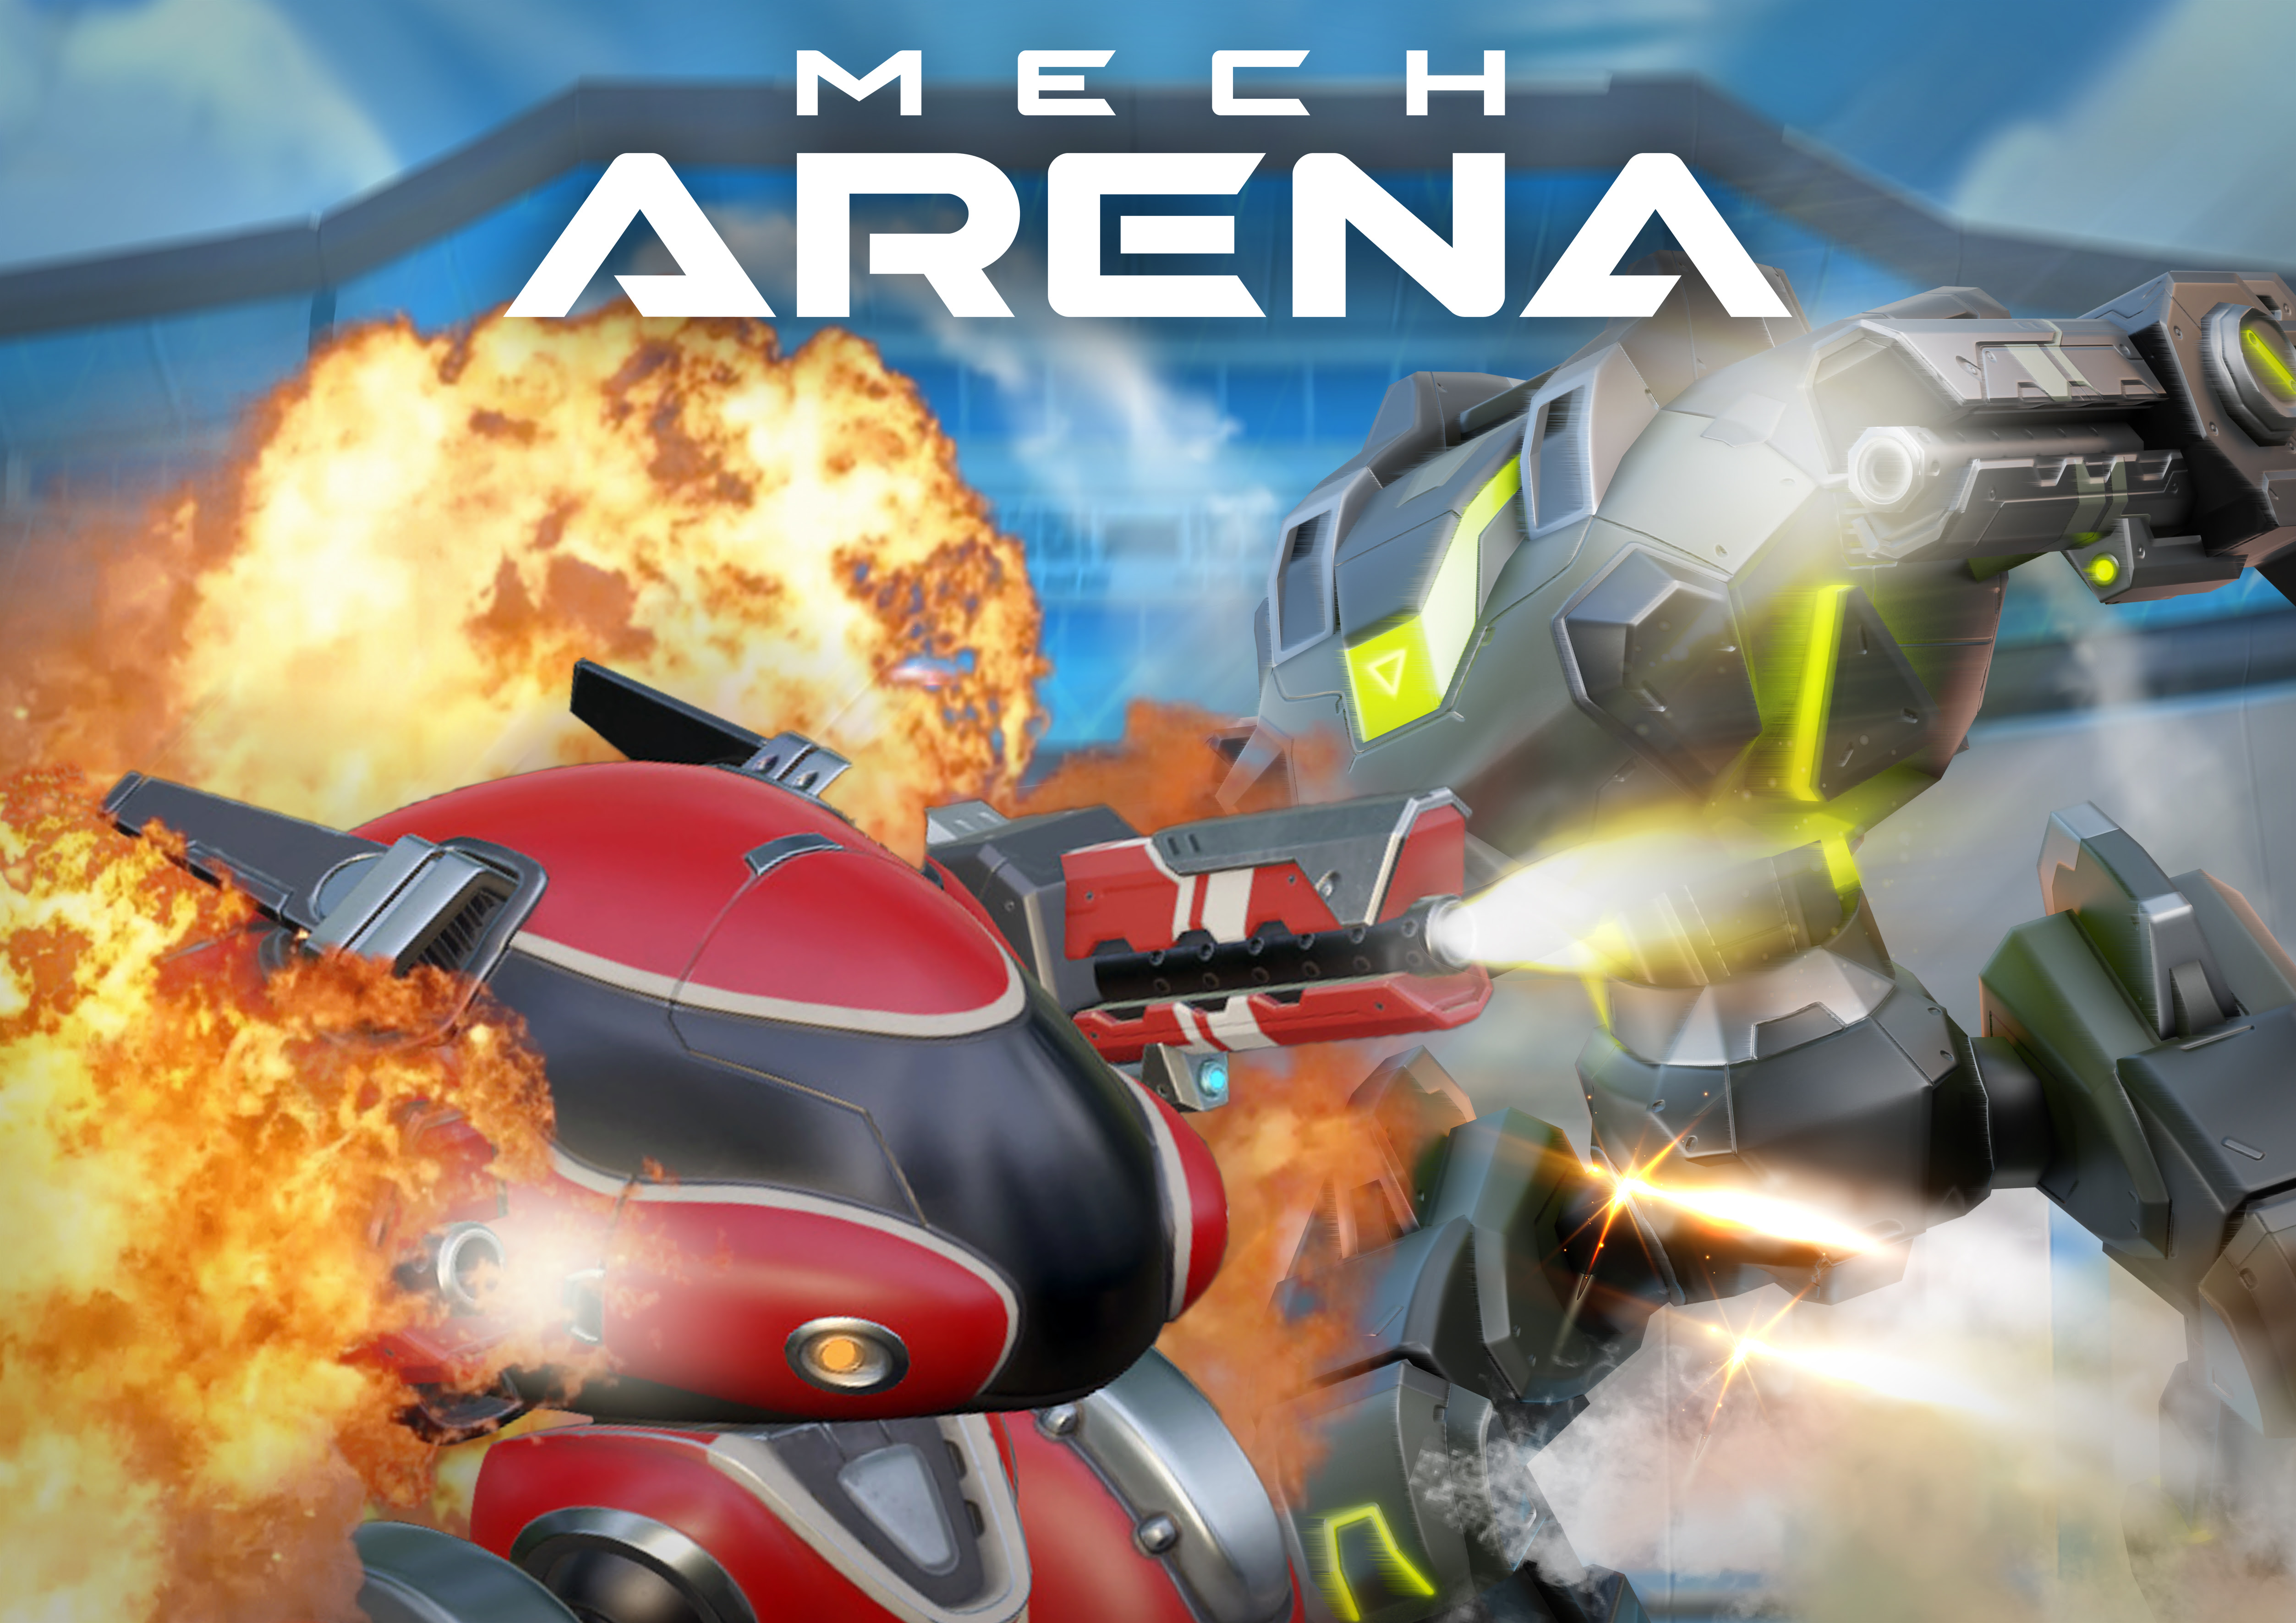 MECH ARENA #MechsAreHere Event Begins Today on iOS and Android Mobile ...